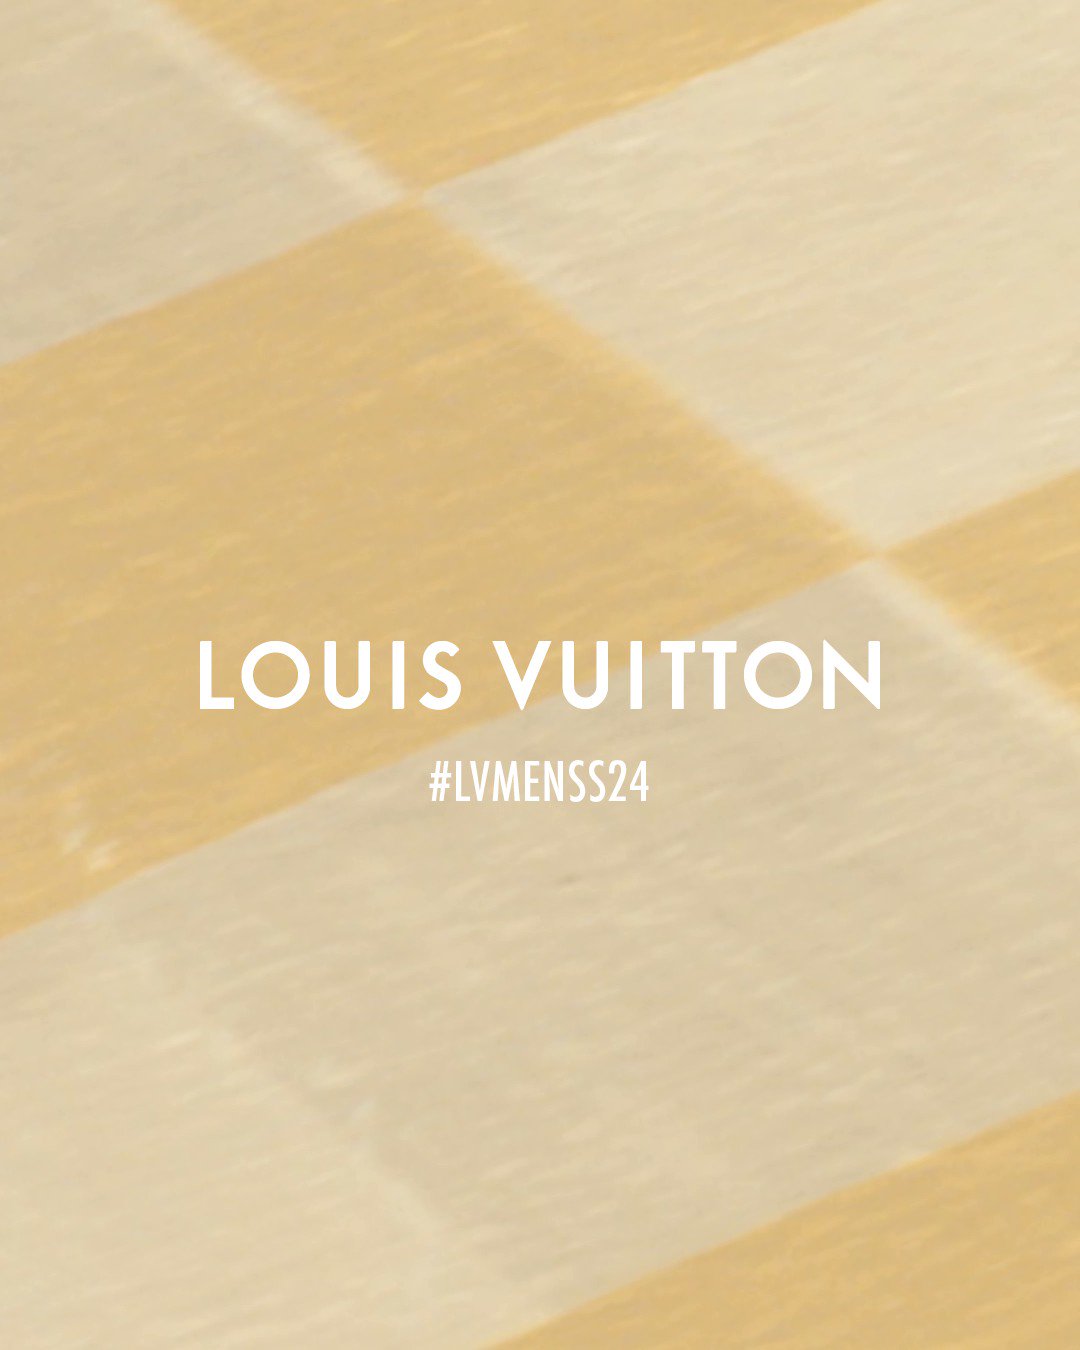 Louis Vuitton on X: Paris. Home to the Maison #LouisVuitton since 1854.  Watch the #LVSS17 Show by @TWNghesquiere live Oct 5th at   #PFW  / X